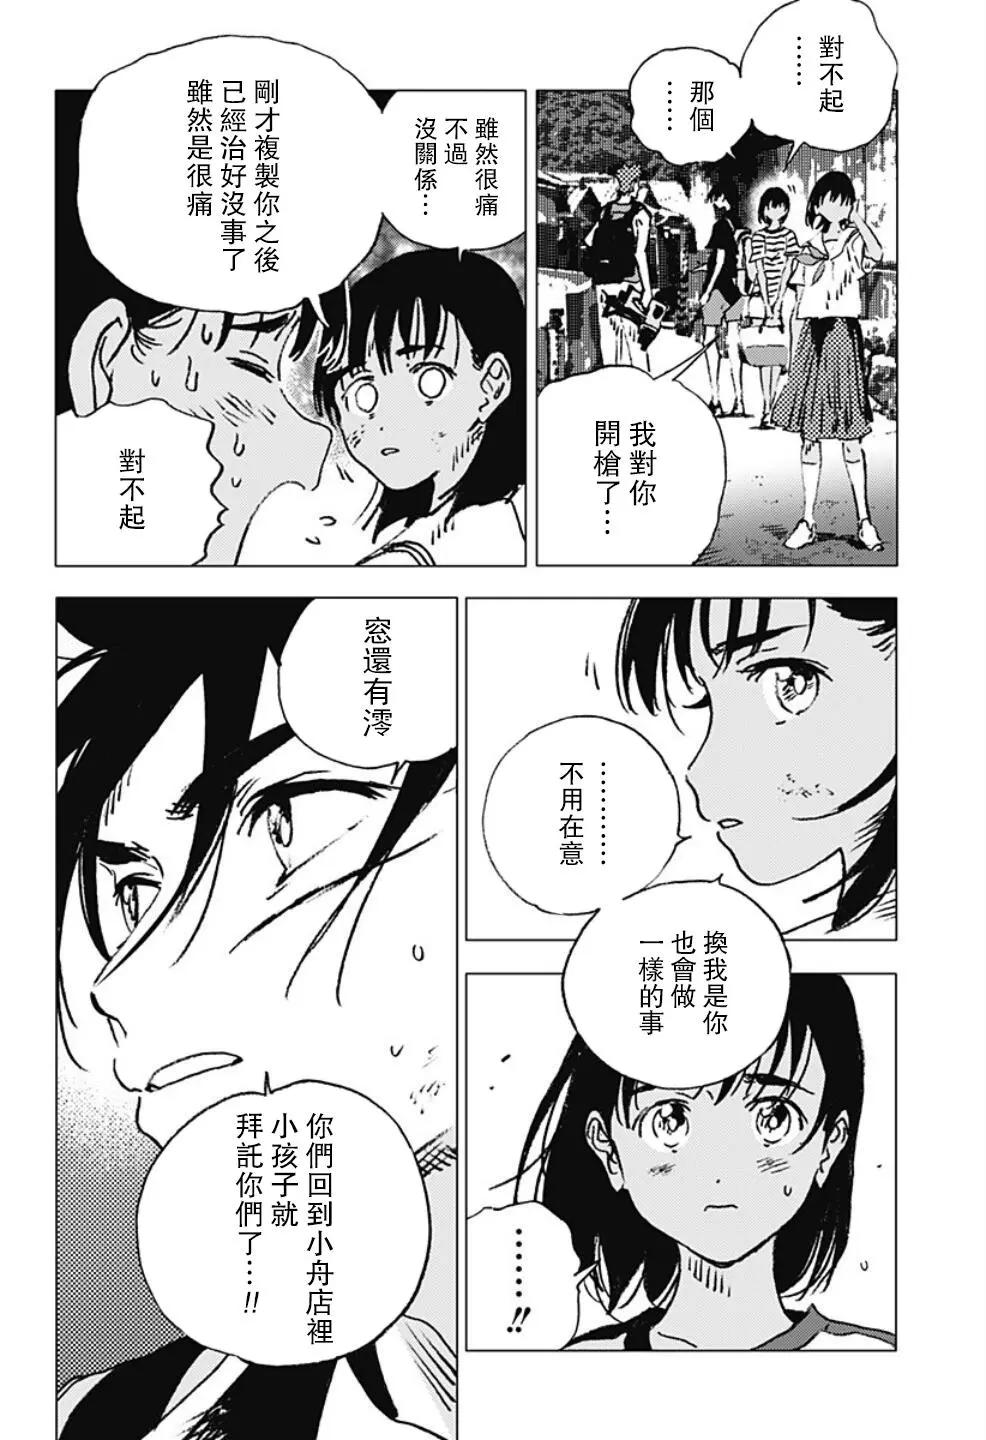 Summer time rendering - 第111話 - 4